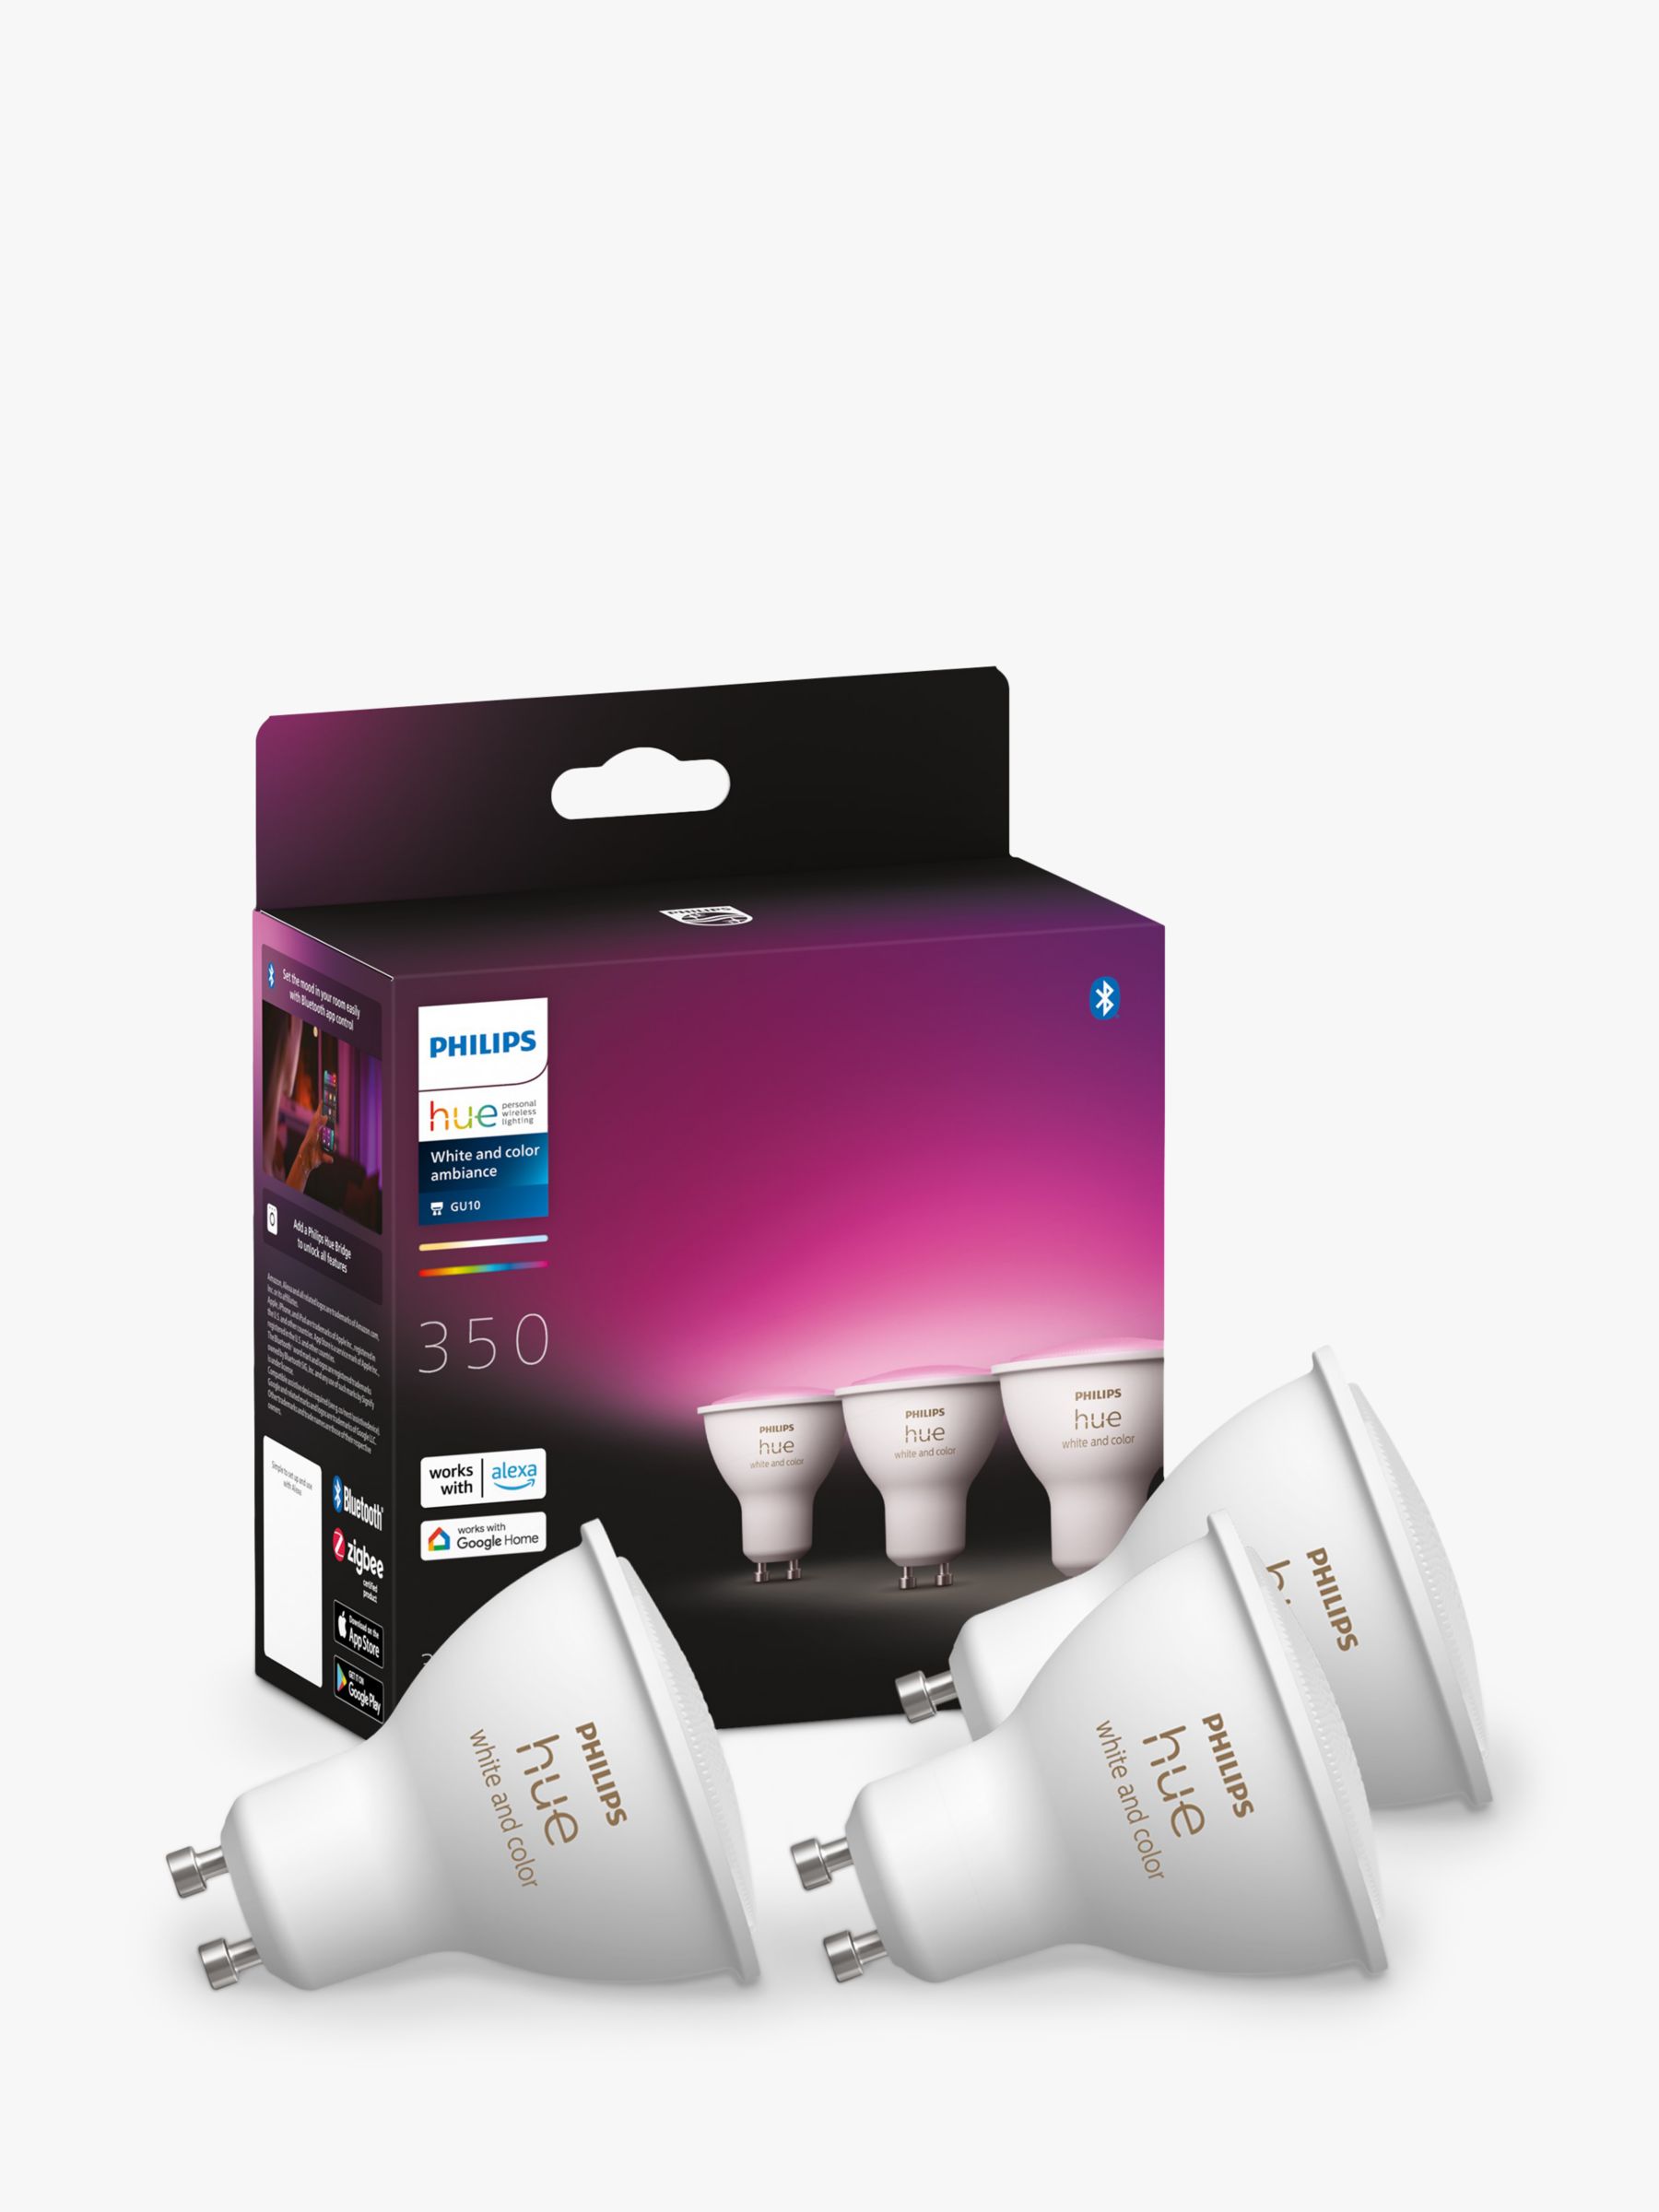 Philips Hue GU10 White and Colour Bulb Review 